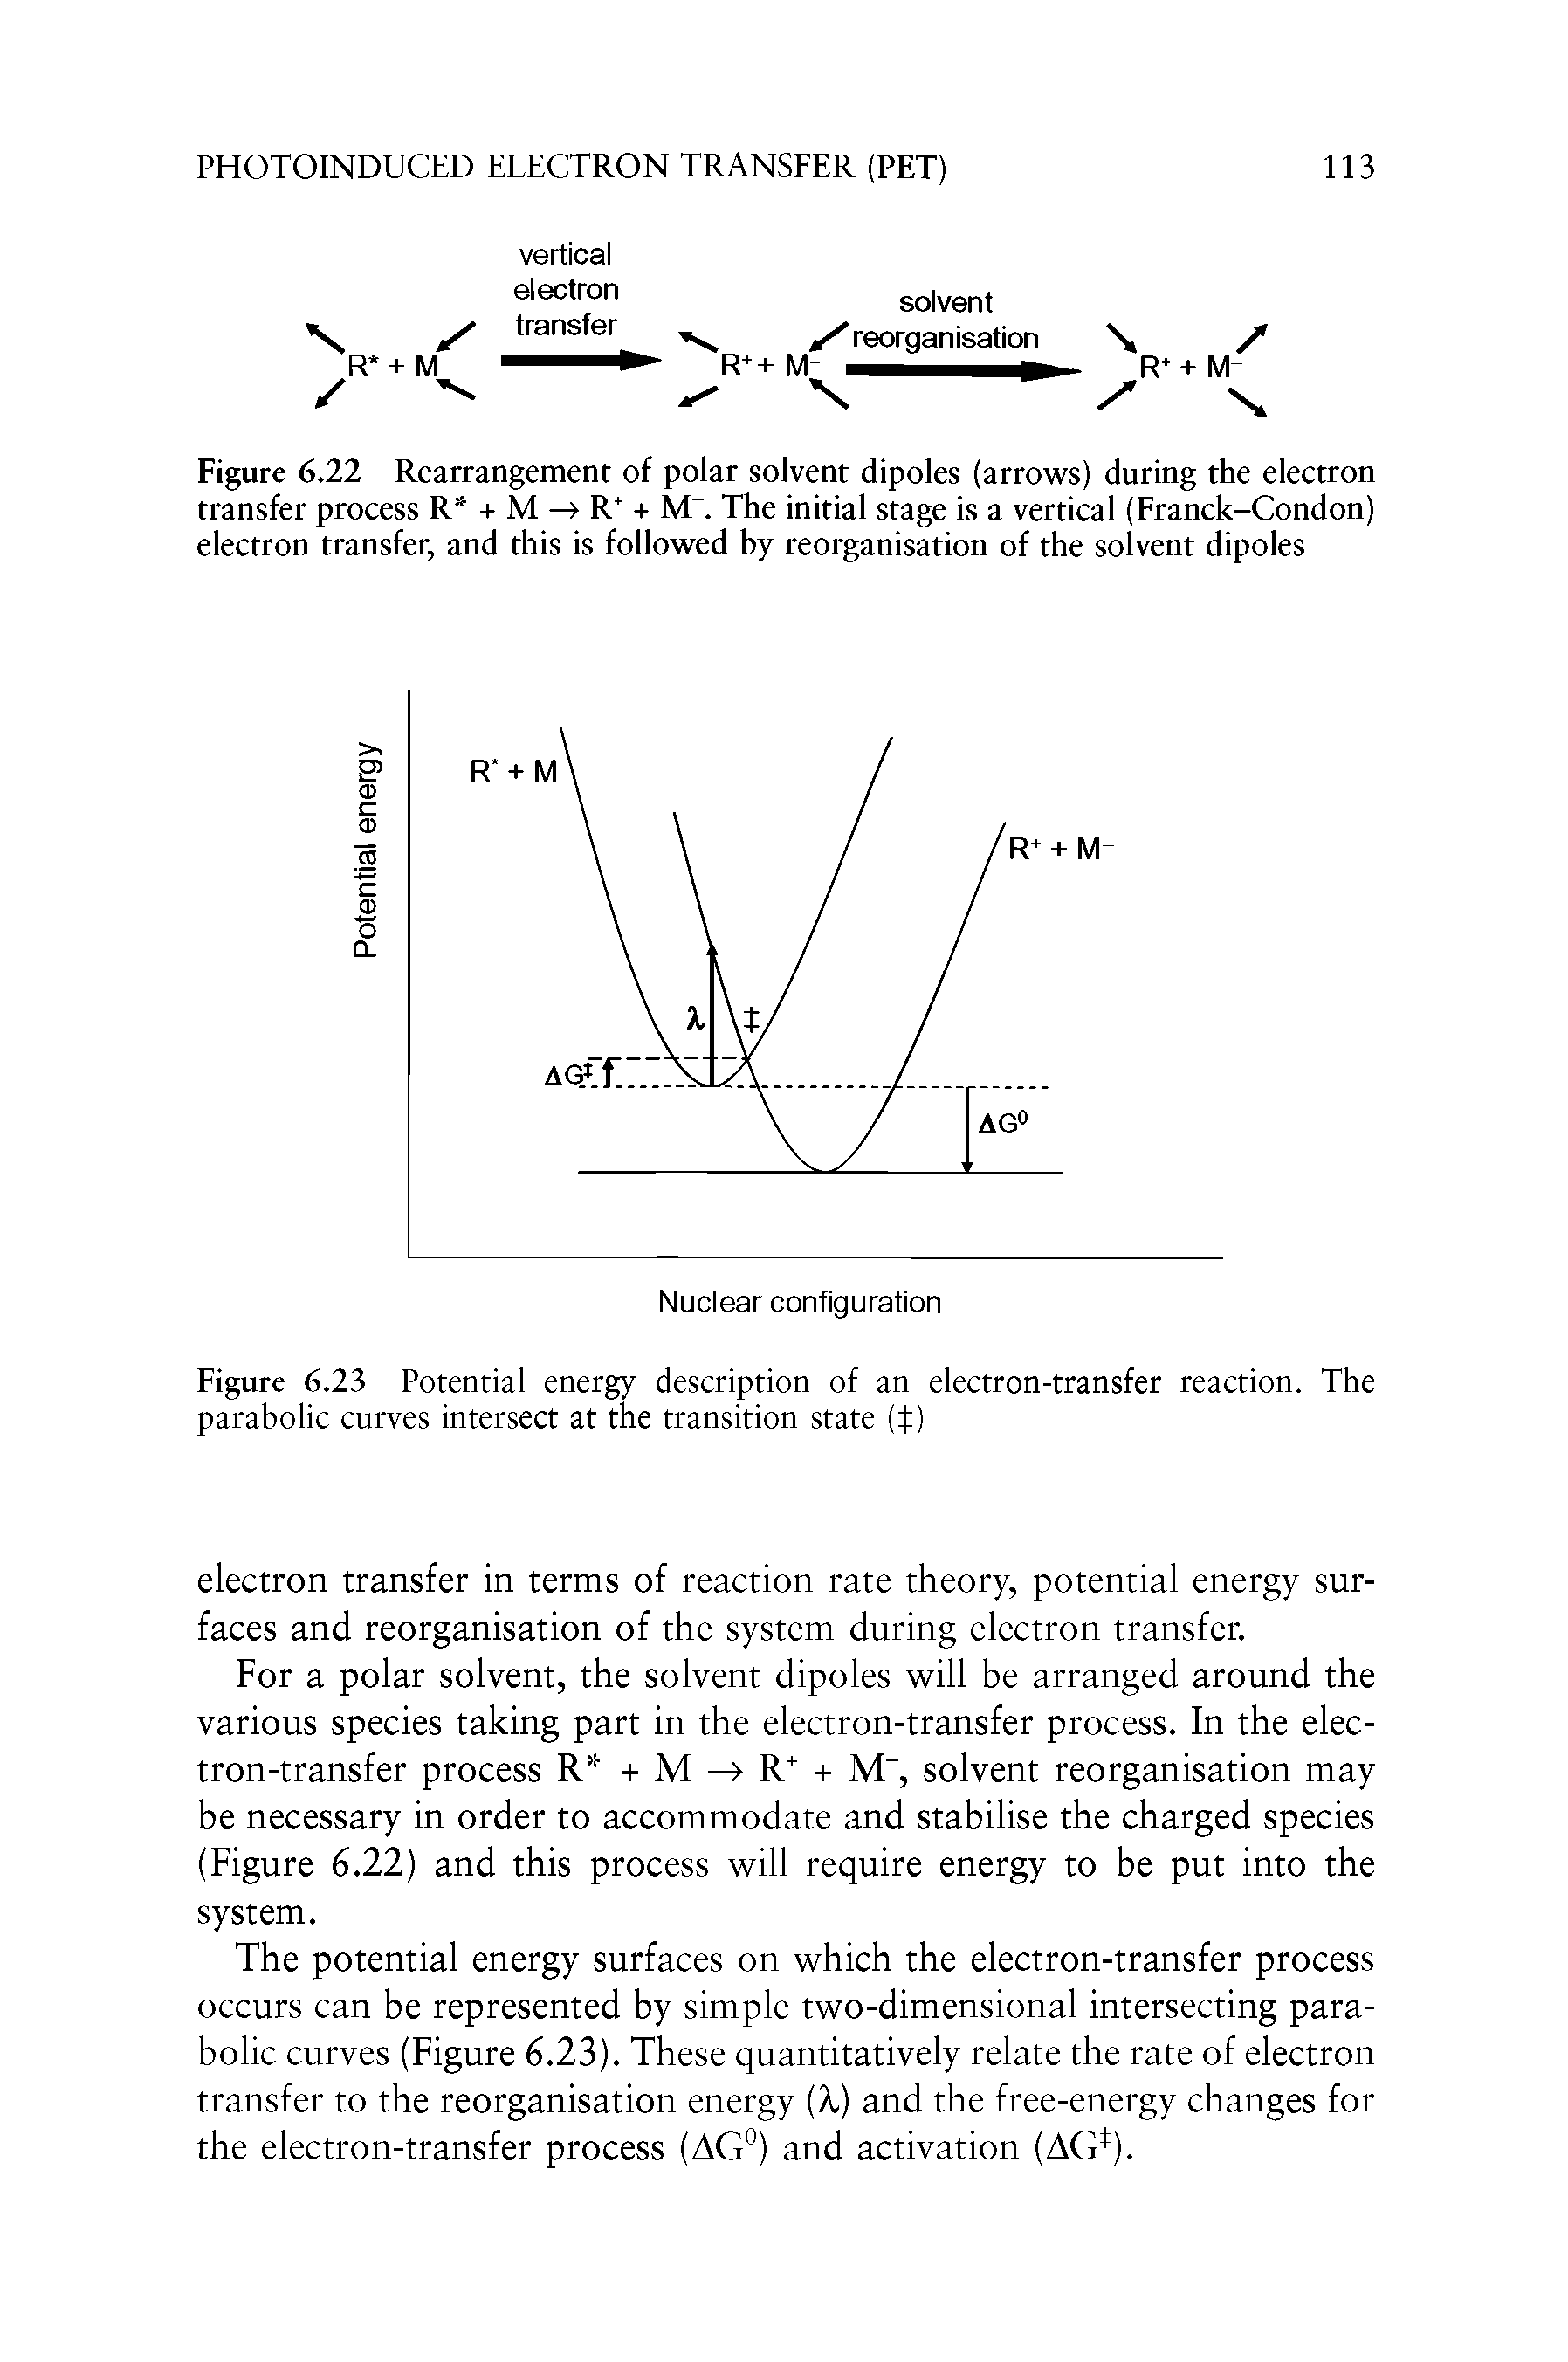 Figure 6.23 Potential energy description of an electron-transfer reaction. The parabolic curves intersect at the transition state (if)...